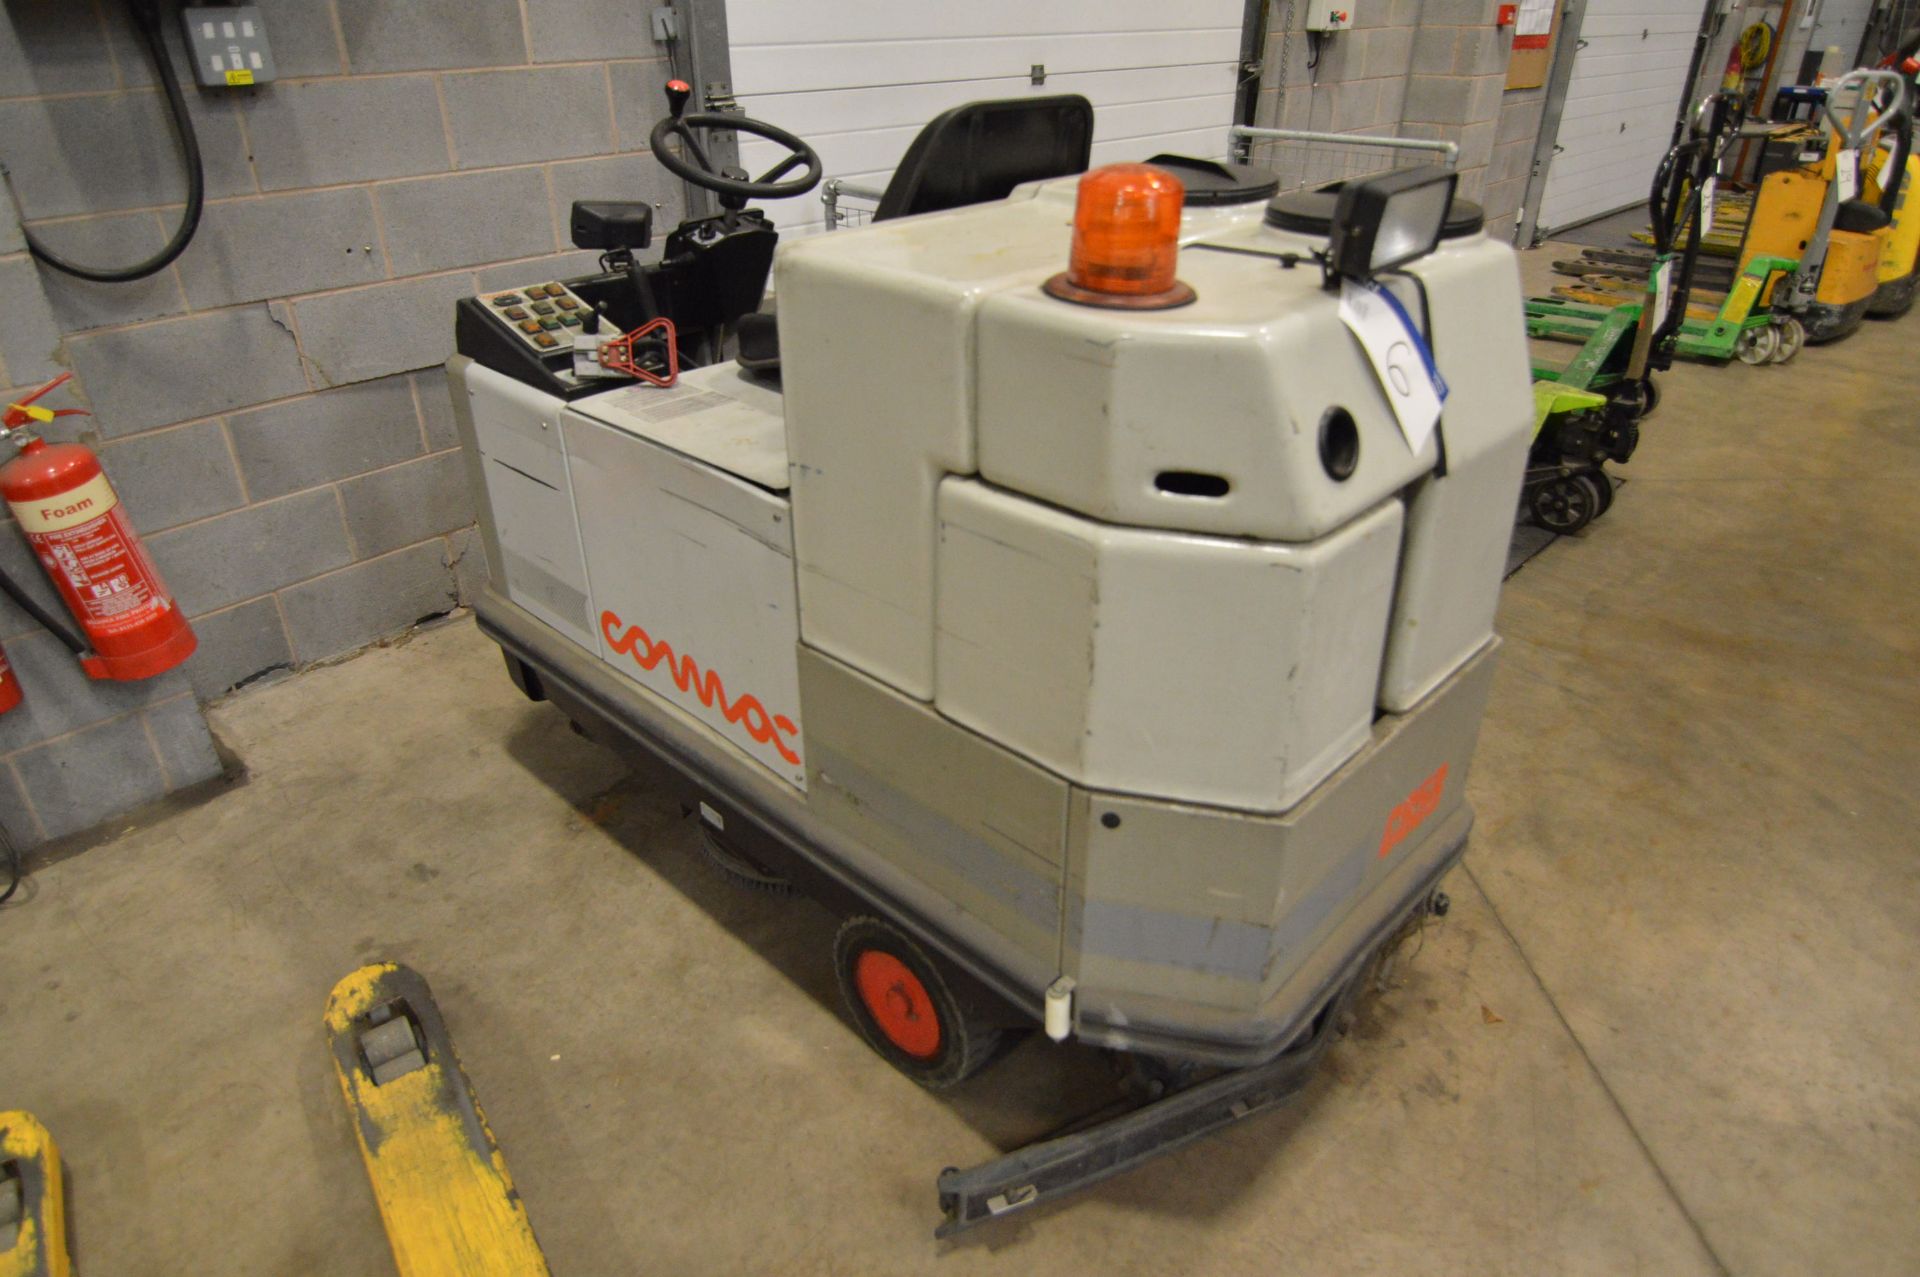 Comac C85B RIDE-ON-FLOOR CLEANING MACHINE, serial - Image 3 of 5